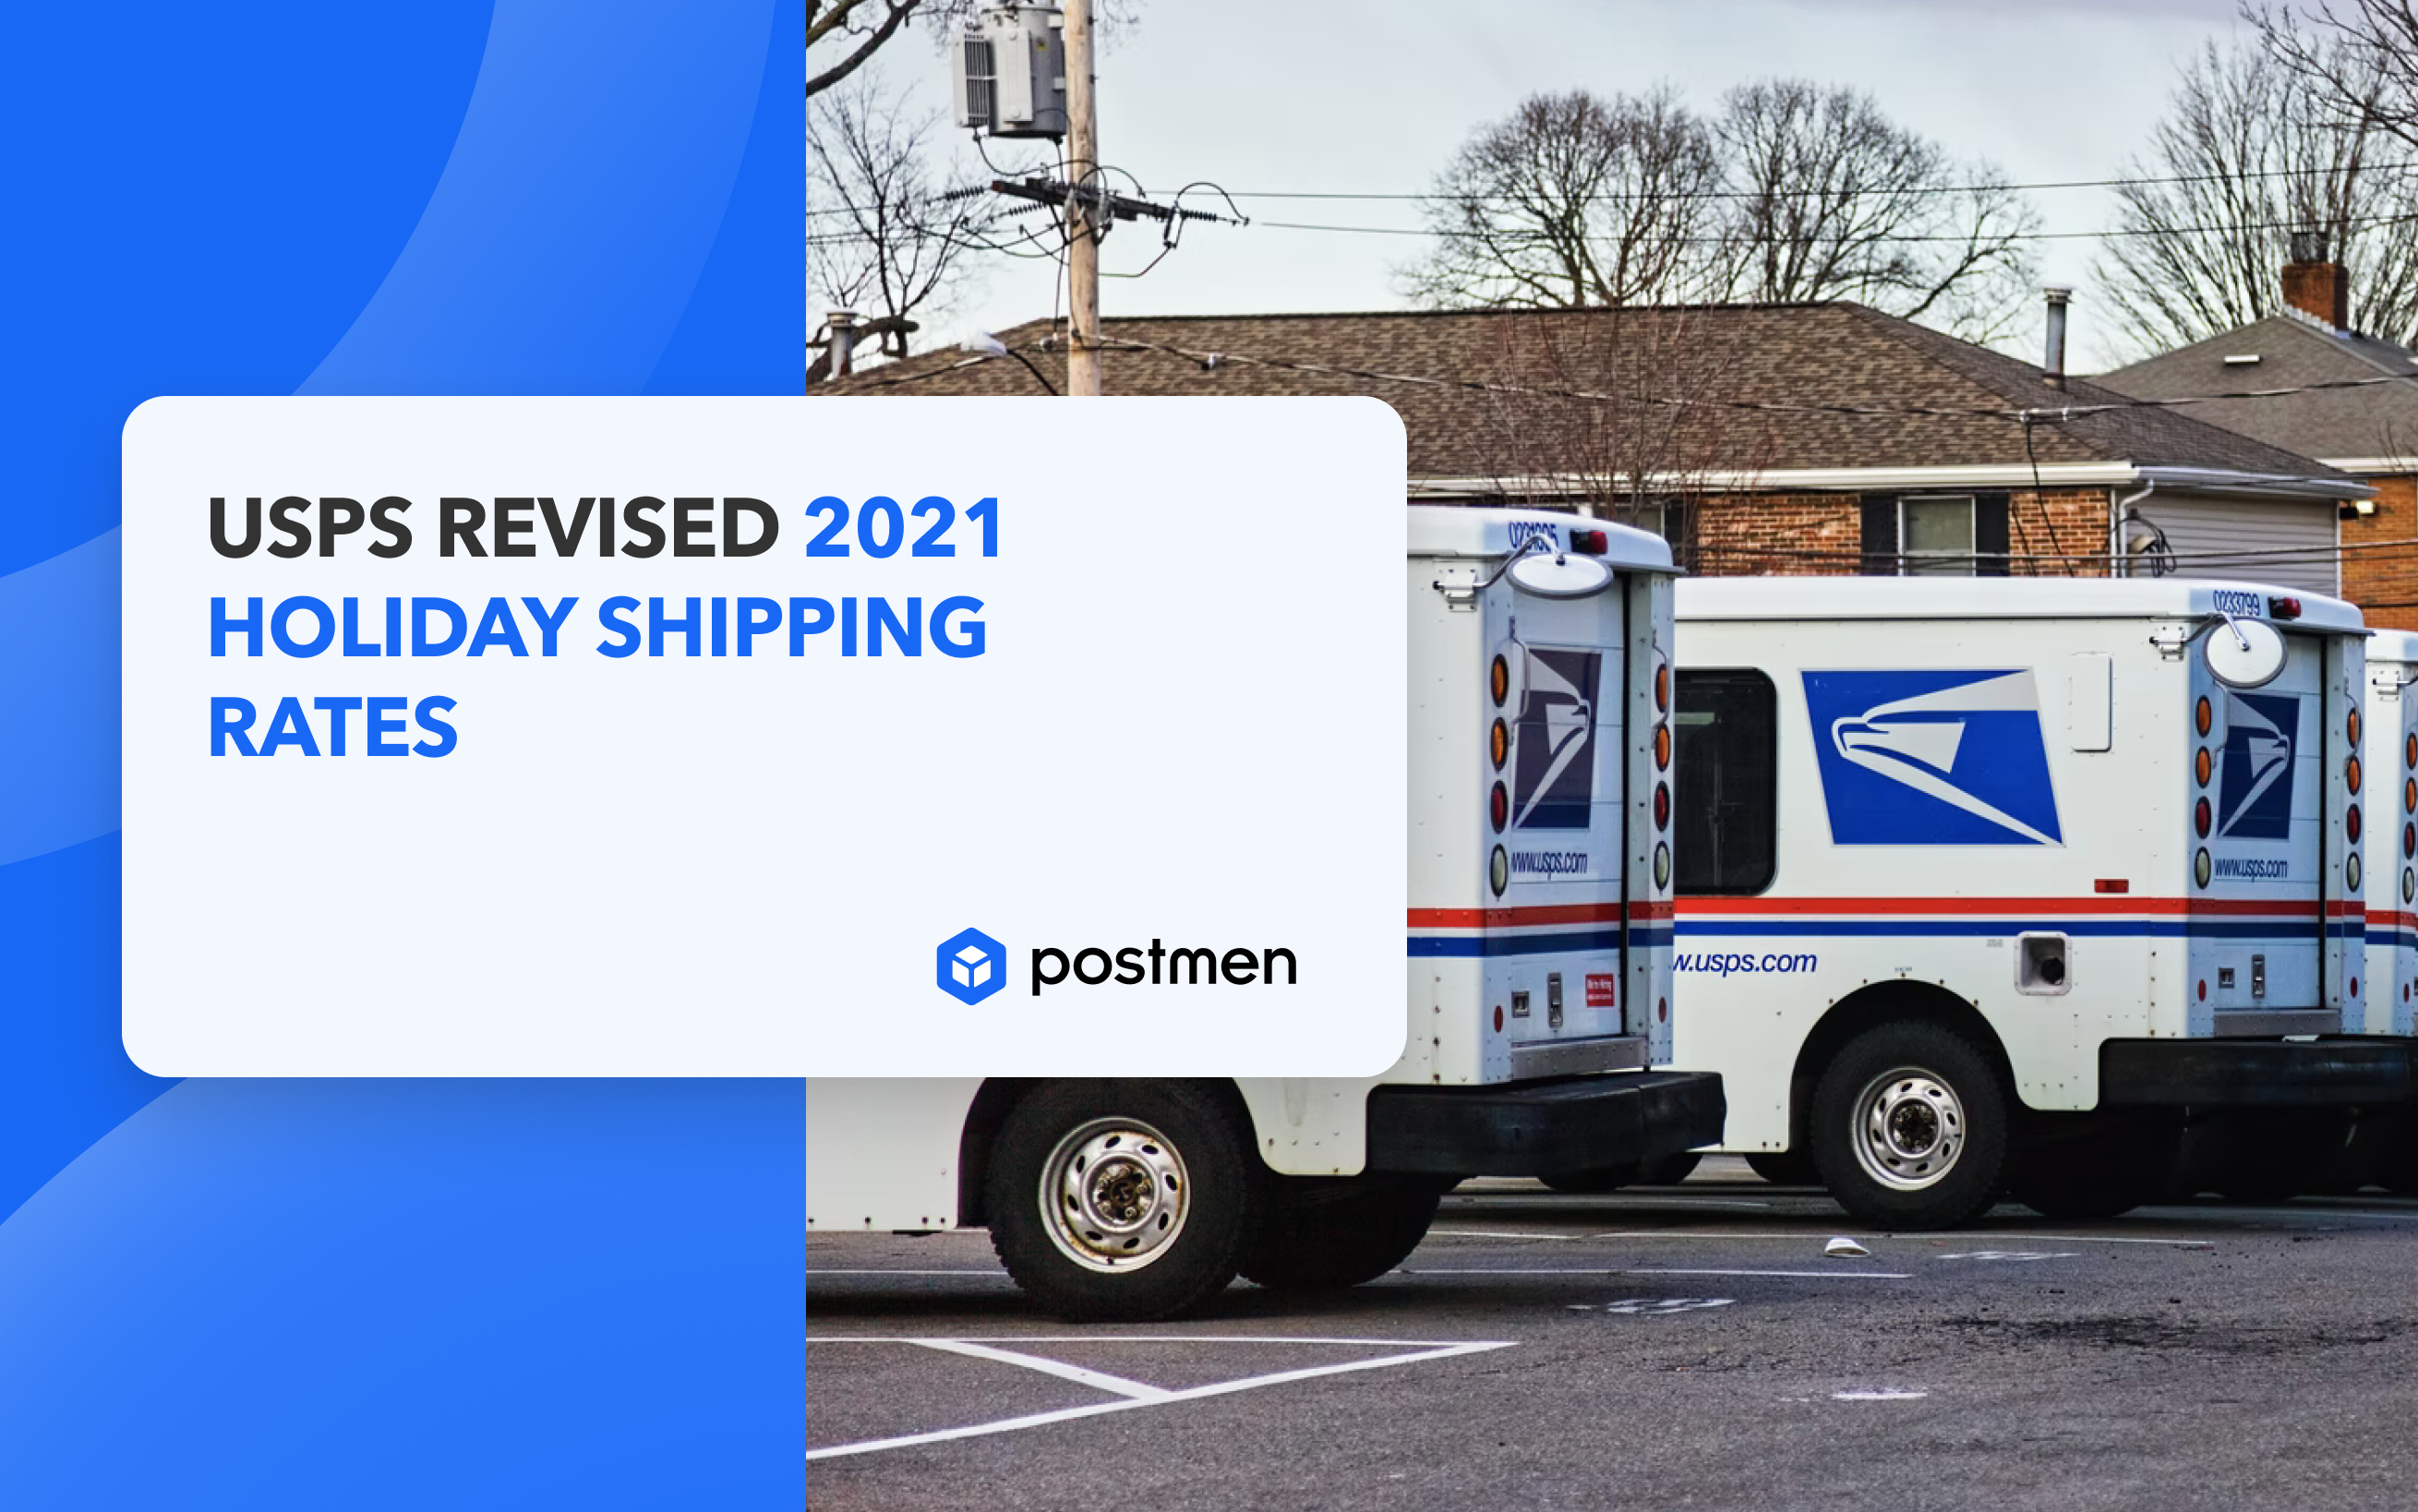 USPS announced a temporary increase in the shipping rates for 2021 festive season